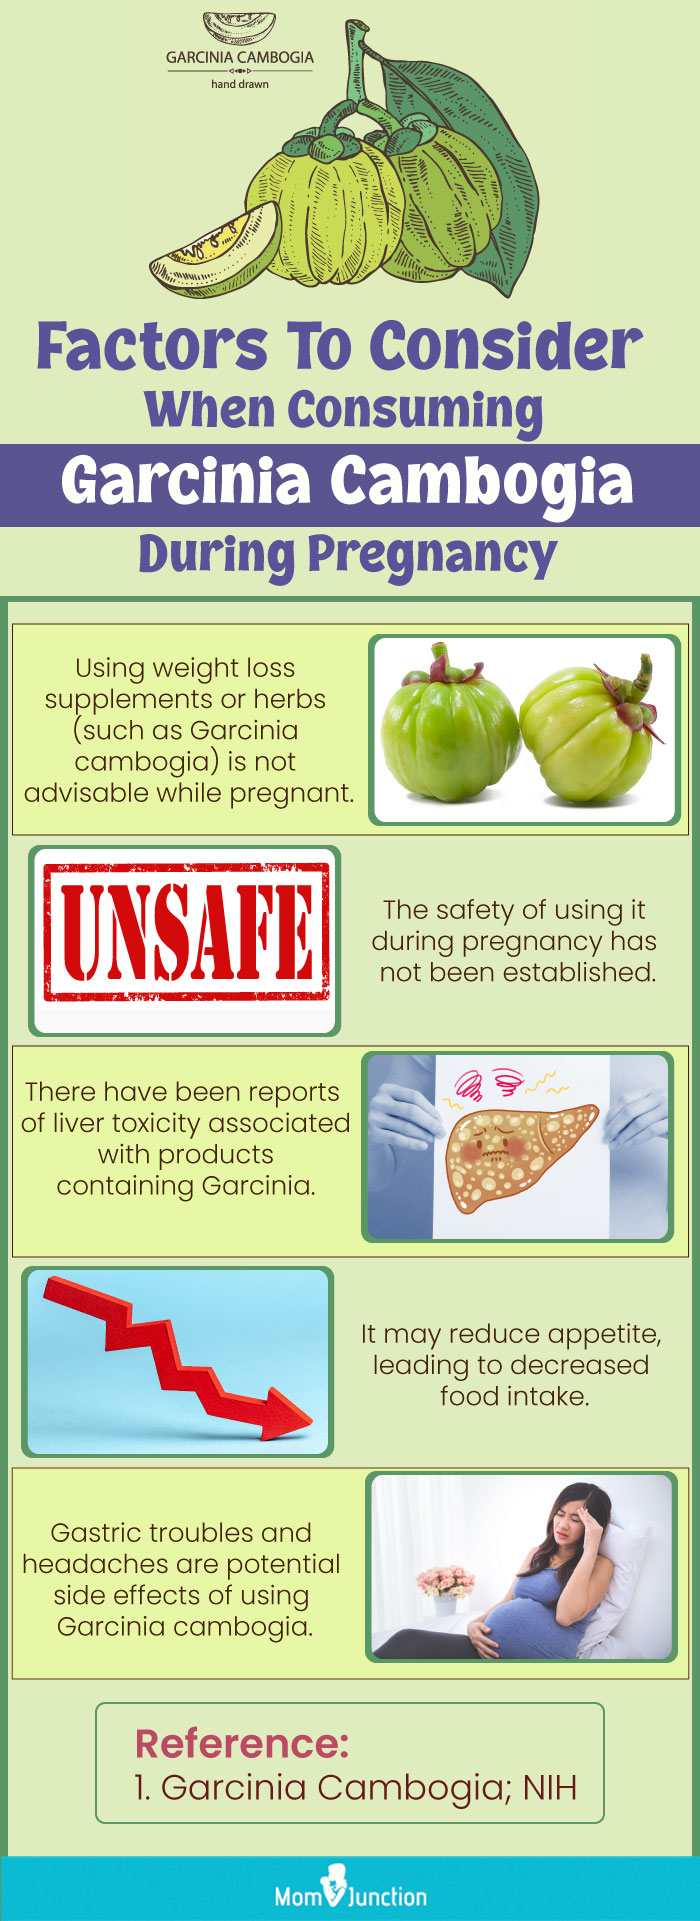 factors to consider when consuming garcinia cambogia during pregnancy (infographic)